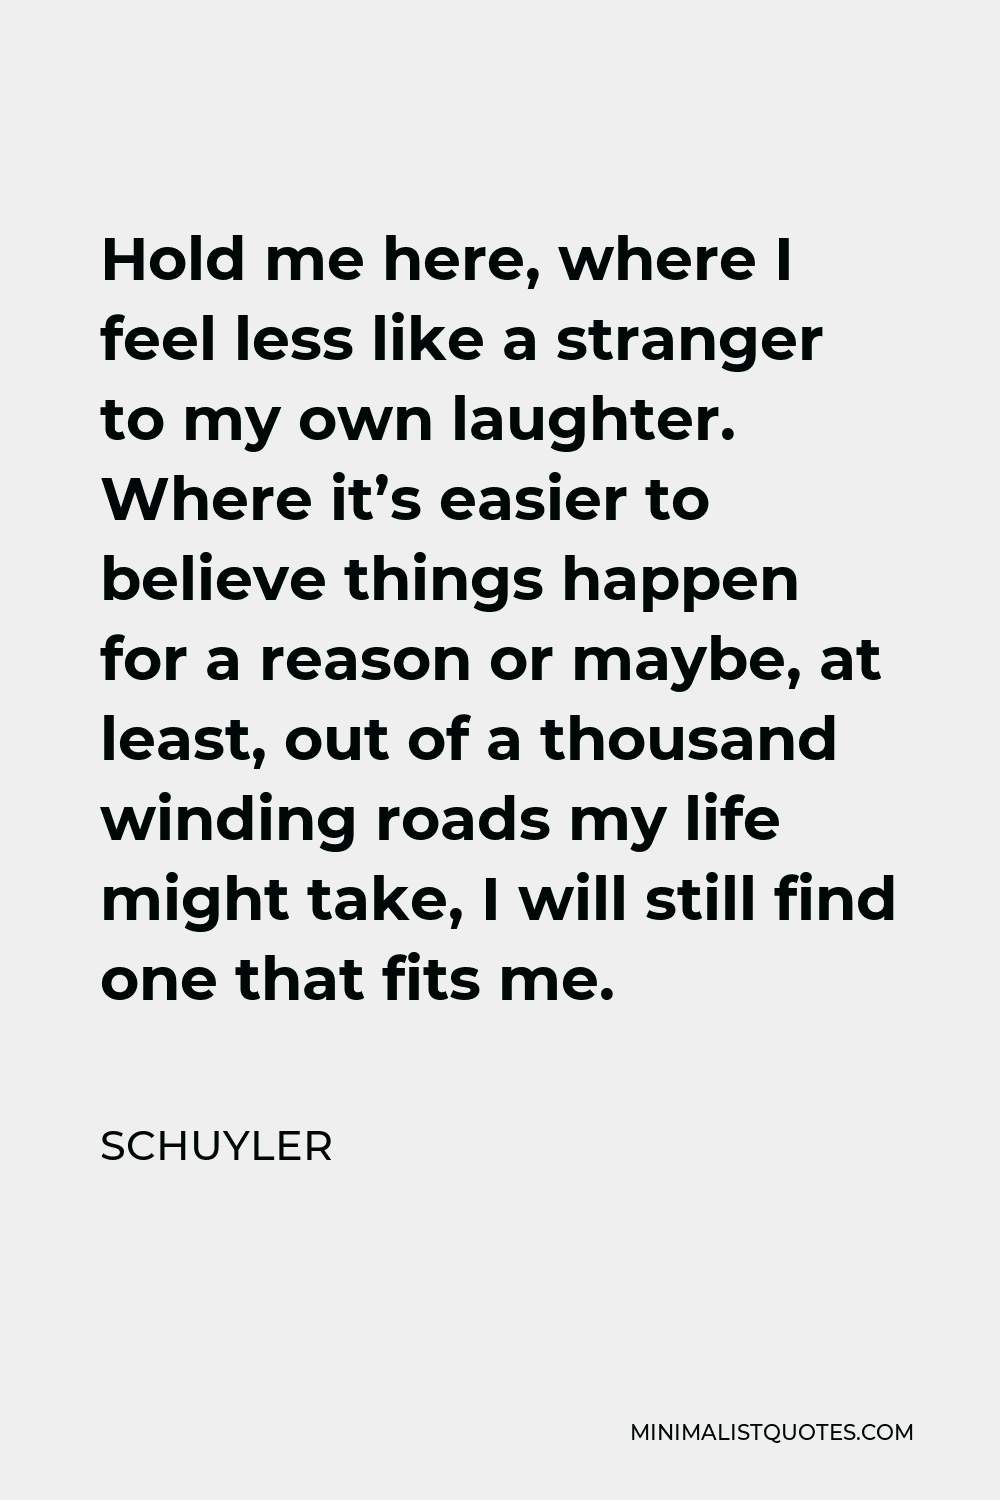 Schuyler Quote - Hold me here, where I feel less like a stranger to my own laughter. Where it’s easier to believe things happen for a reason or maybe, at least, out of a thousand winding roads my life might take, I will still find one that fits me.